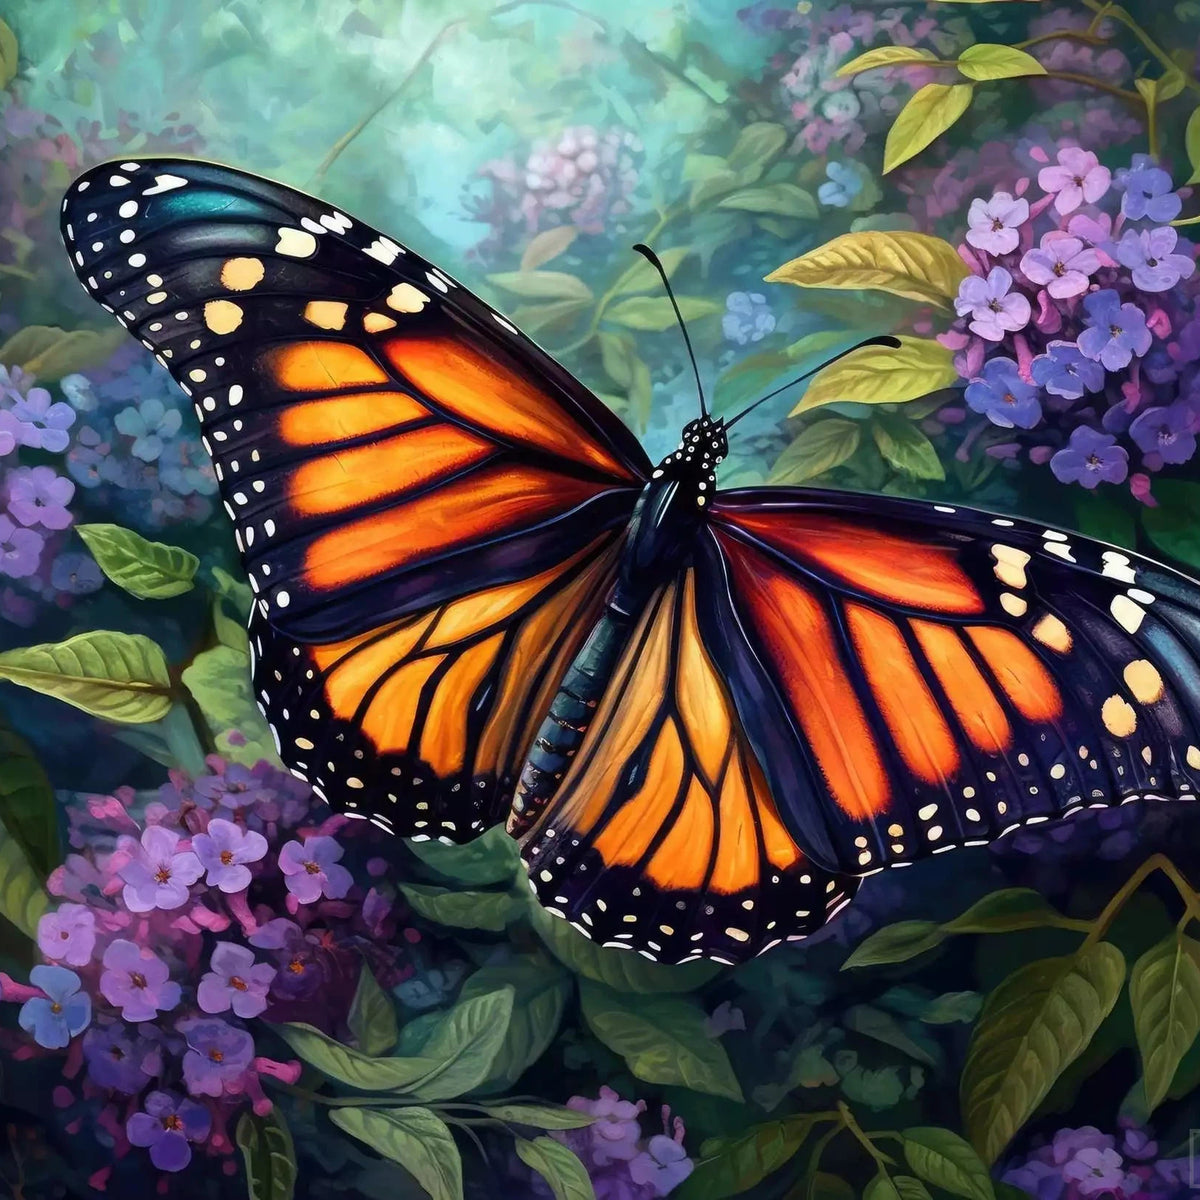 Explore the butterfly diamond painting of a vibrant monarch butterfly with striking black and orange patterns, resting on a cluster of petite purple wildflowers. With wings outspread and antennae raised. The simple yet vibrant composition ensures a delightful and manageable diamond painting experience, making it an excellent choice for beginners in the world of artistic expression through diamond painting.